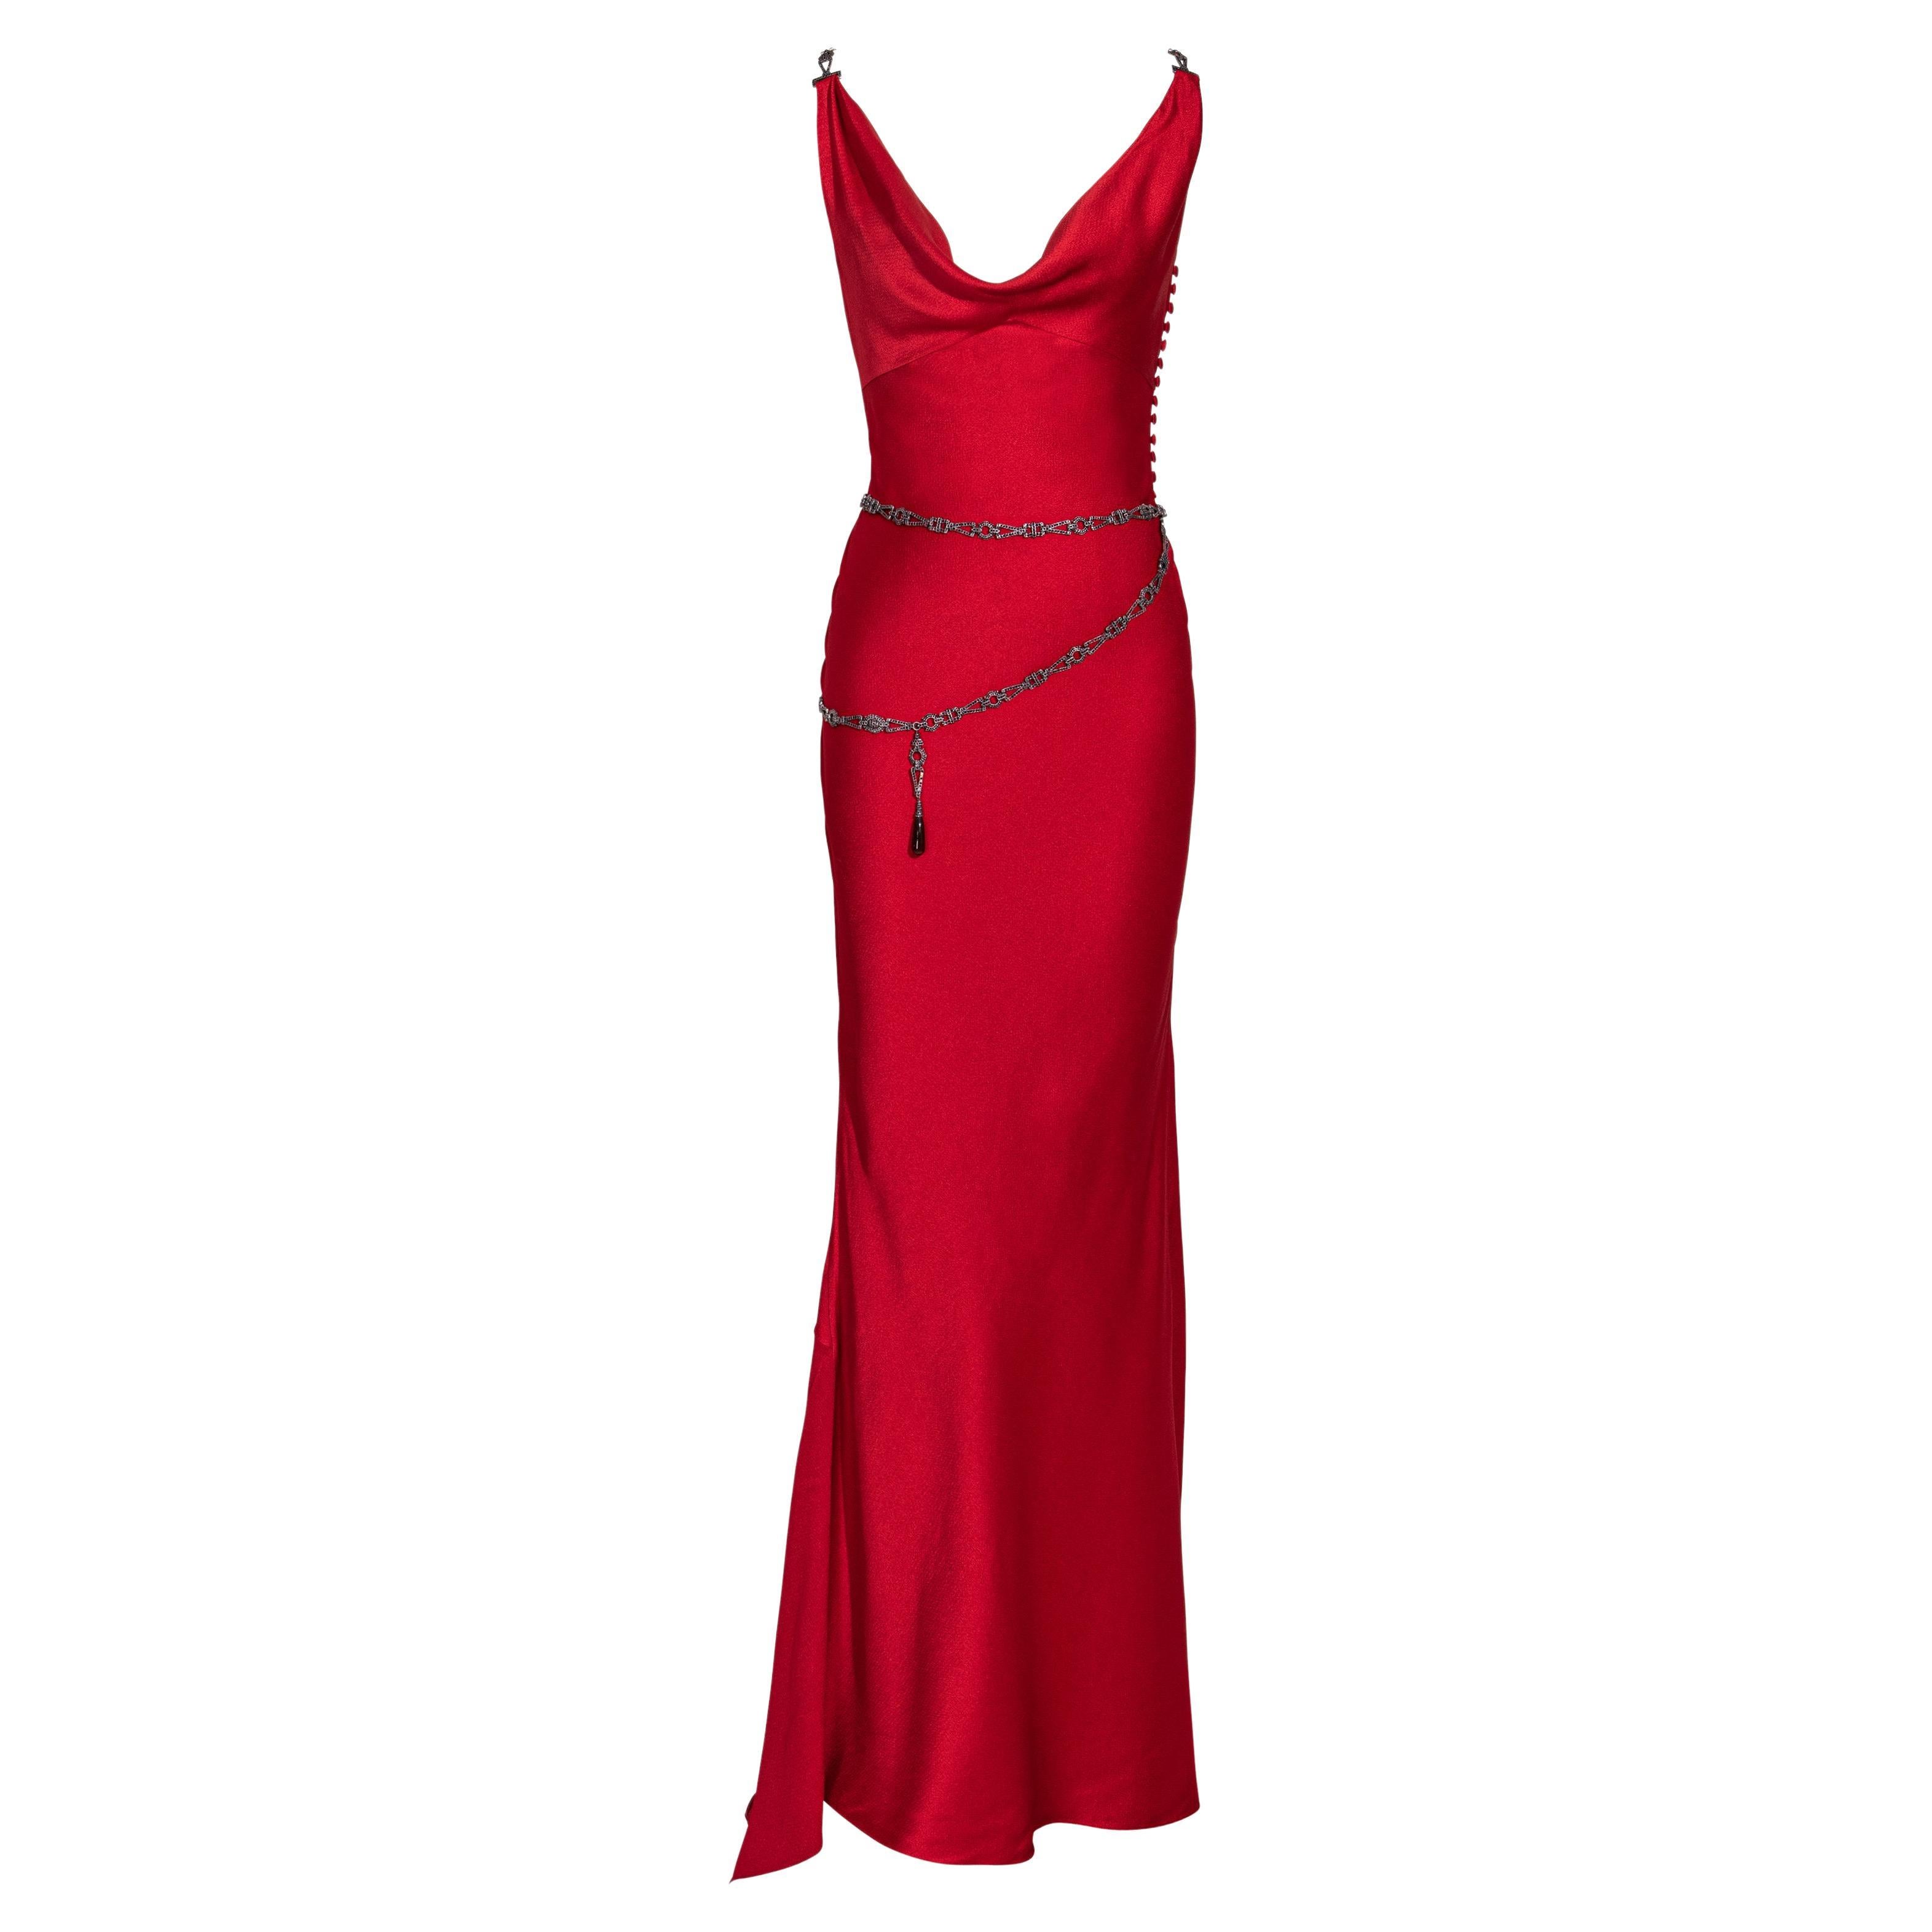 S/S 2000 Christian Dior by John Galliano Red Bias Cut Gown with Jeweled Belt